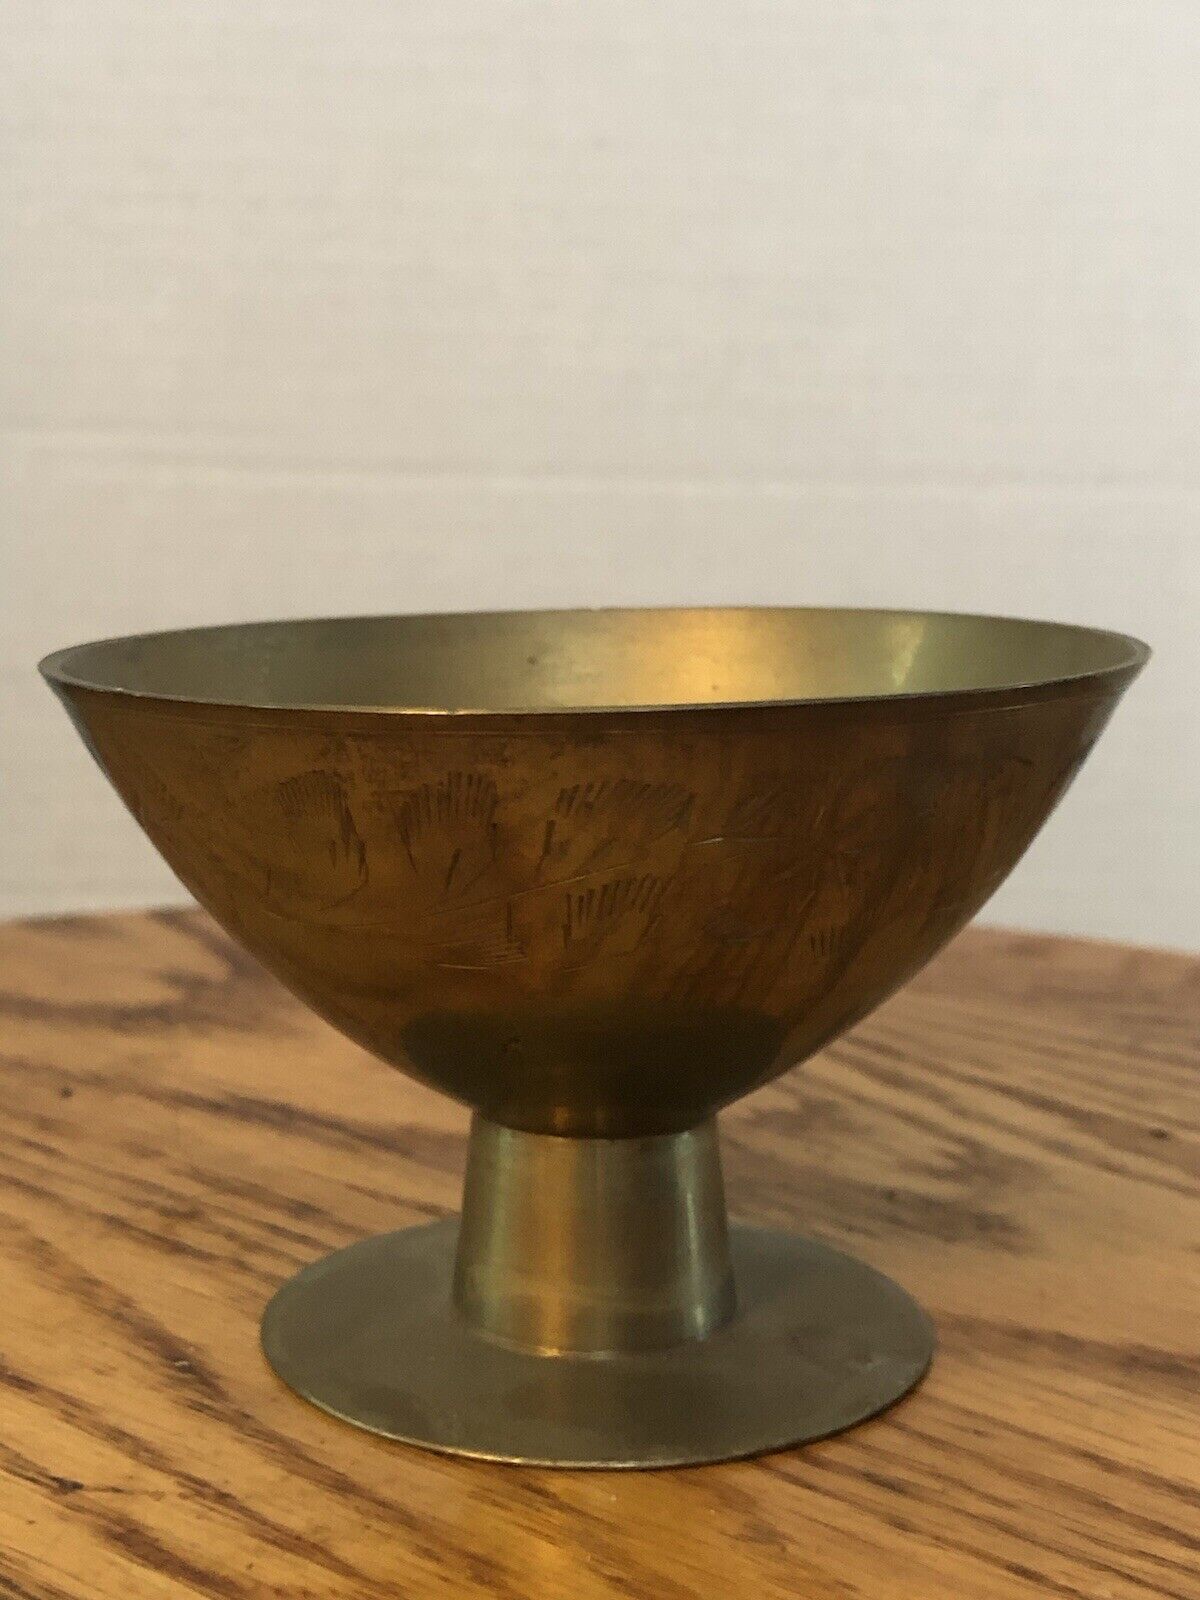 Vintage Copper Footed Bowl. 4 In. diameter. 2.5 In. height.